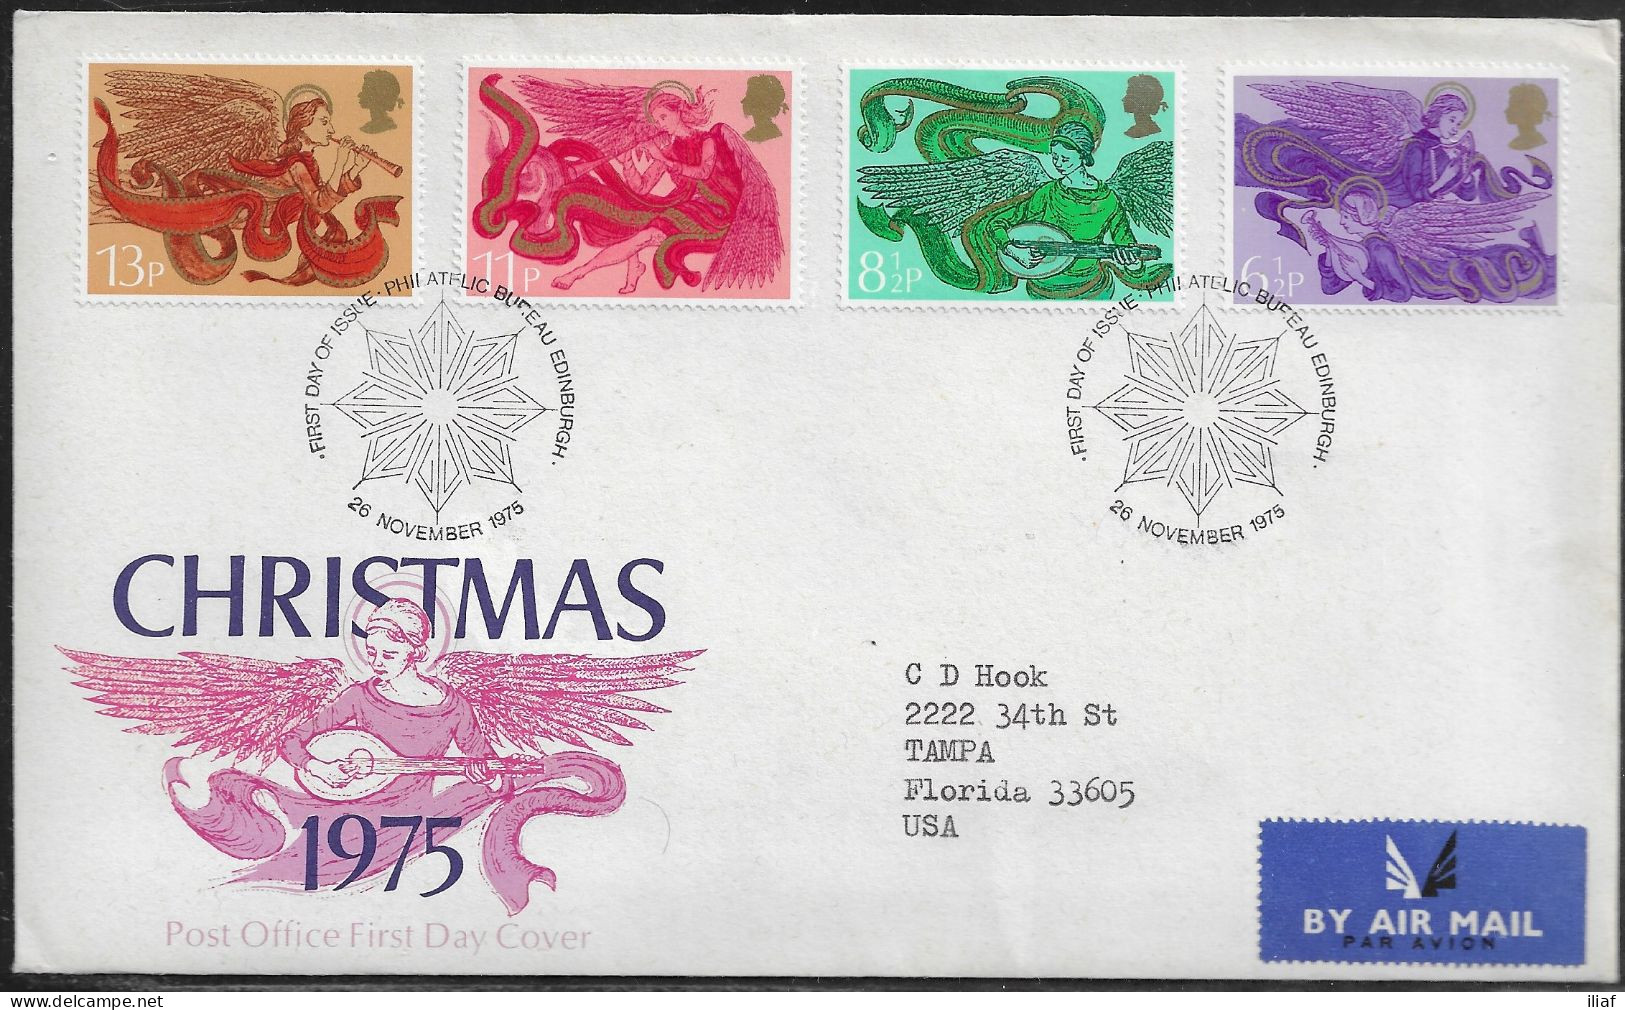 United Kingdom Of Great Britain.  FDC Sc. 758-761.  Christmas 1975 - Angels.  FDC Cancellation On FDC Envelope - 1971-1980 Decimal Issues